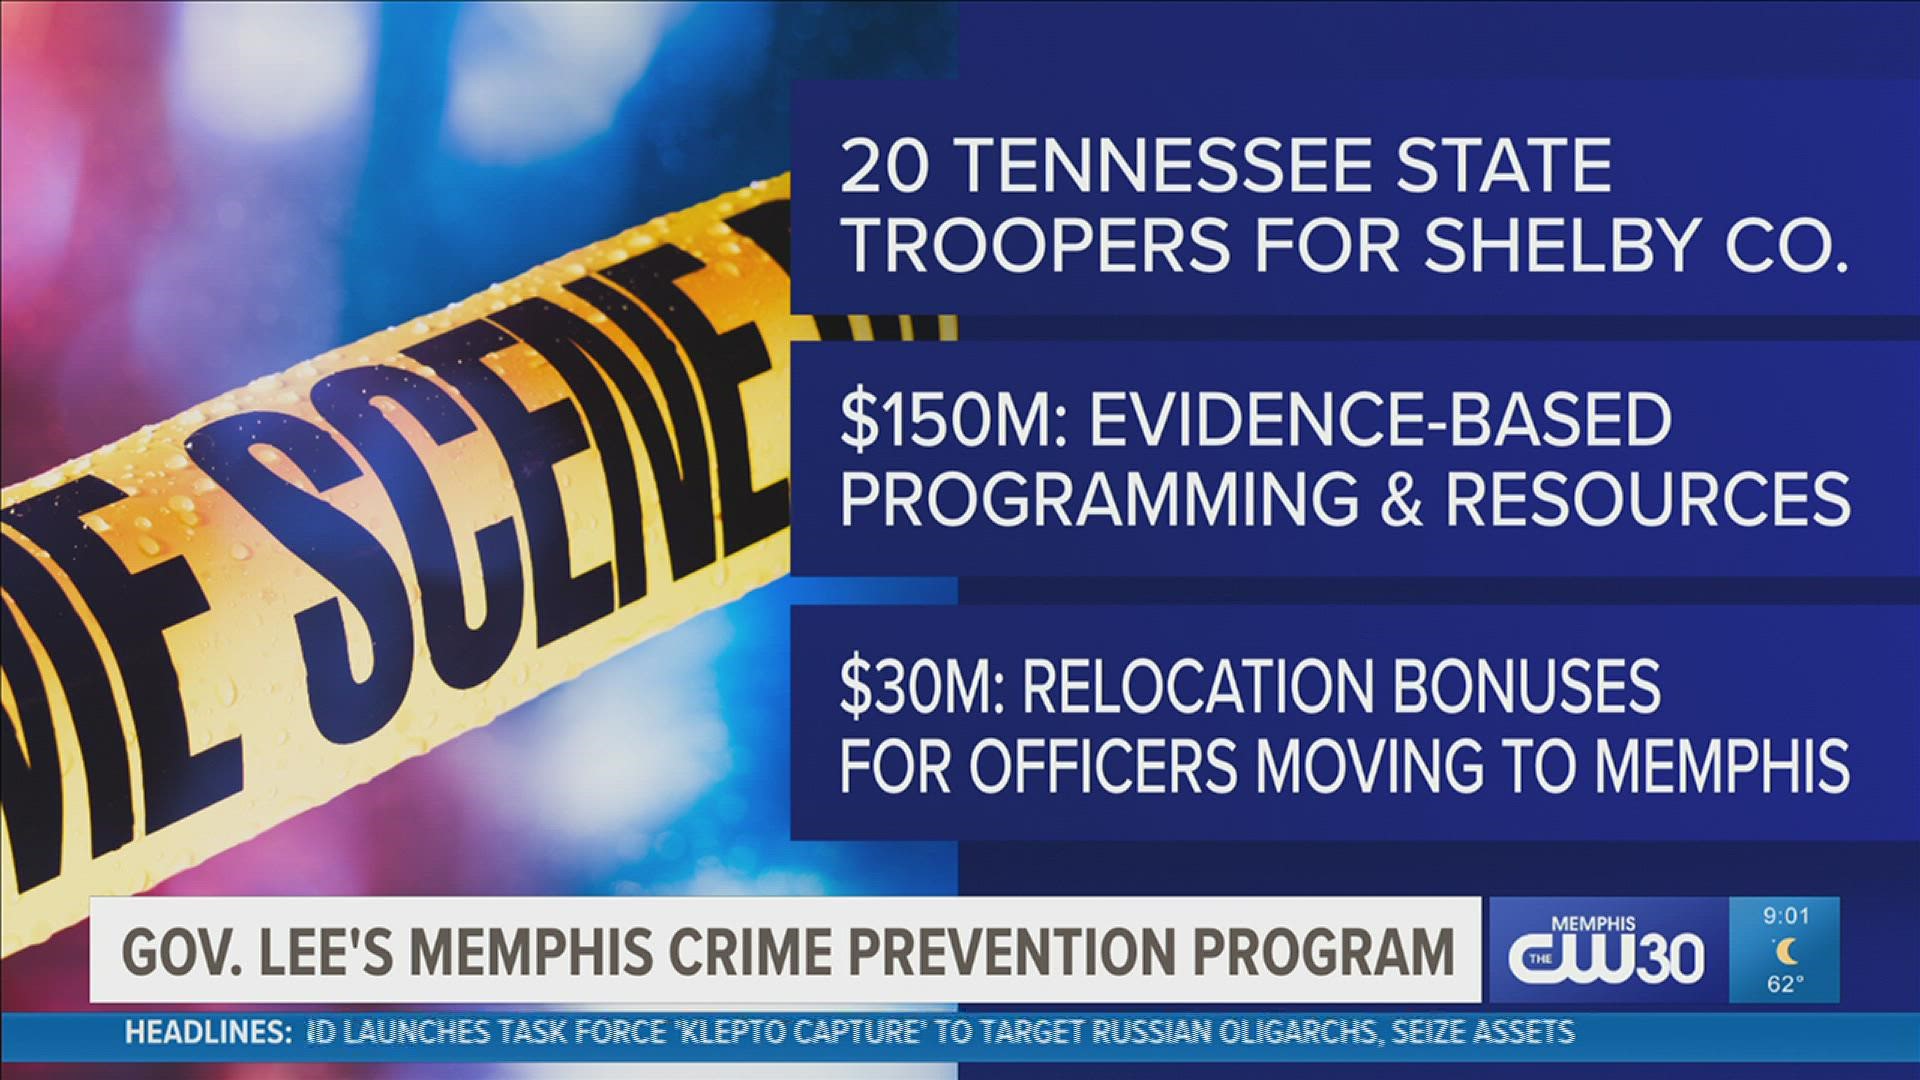 The Tennessee governor announced his proposed state budget Wednesday, including the addition of 20 state troopers in Shelby County.